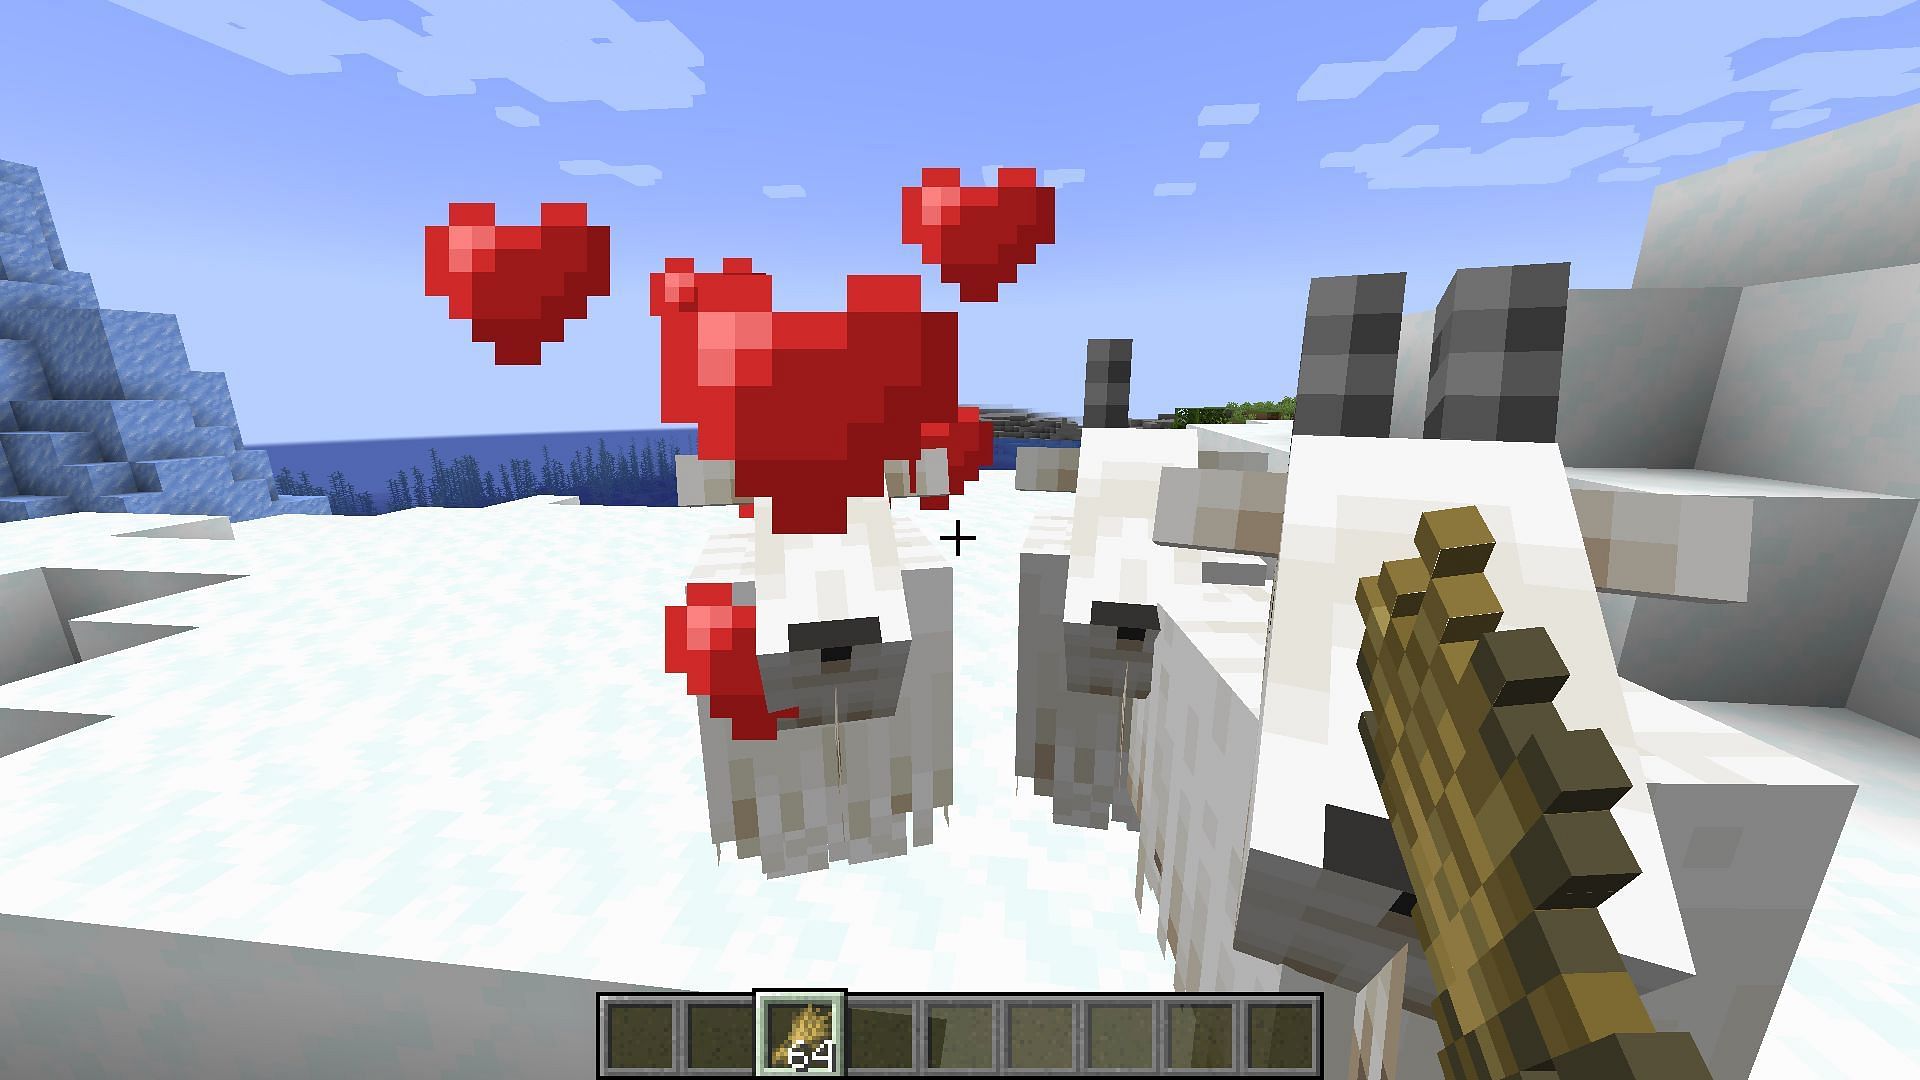 Goats will enter &#039;love mode&#039; after eating wheat (Image via Minecraft 1.19 update)